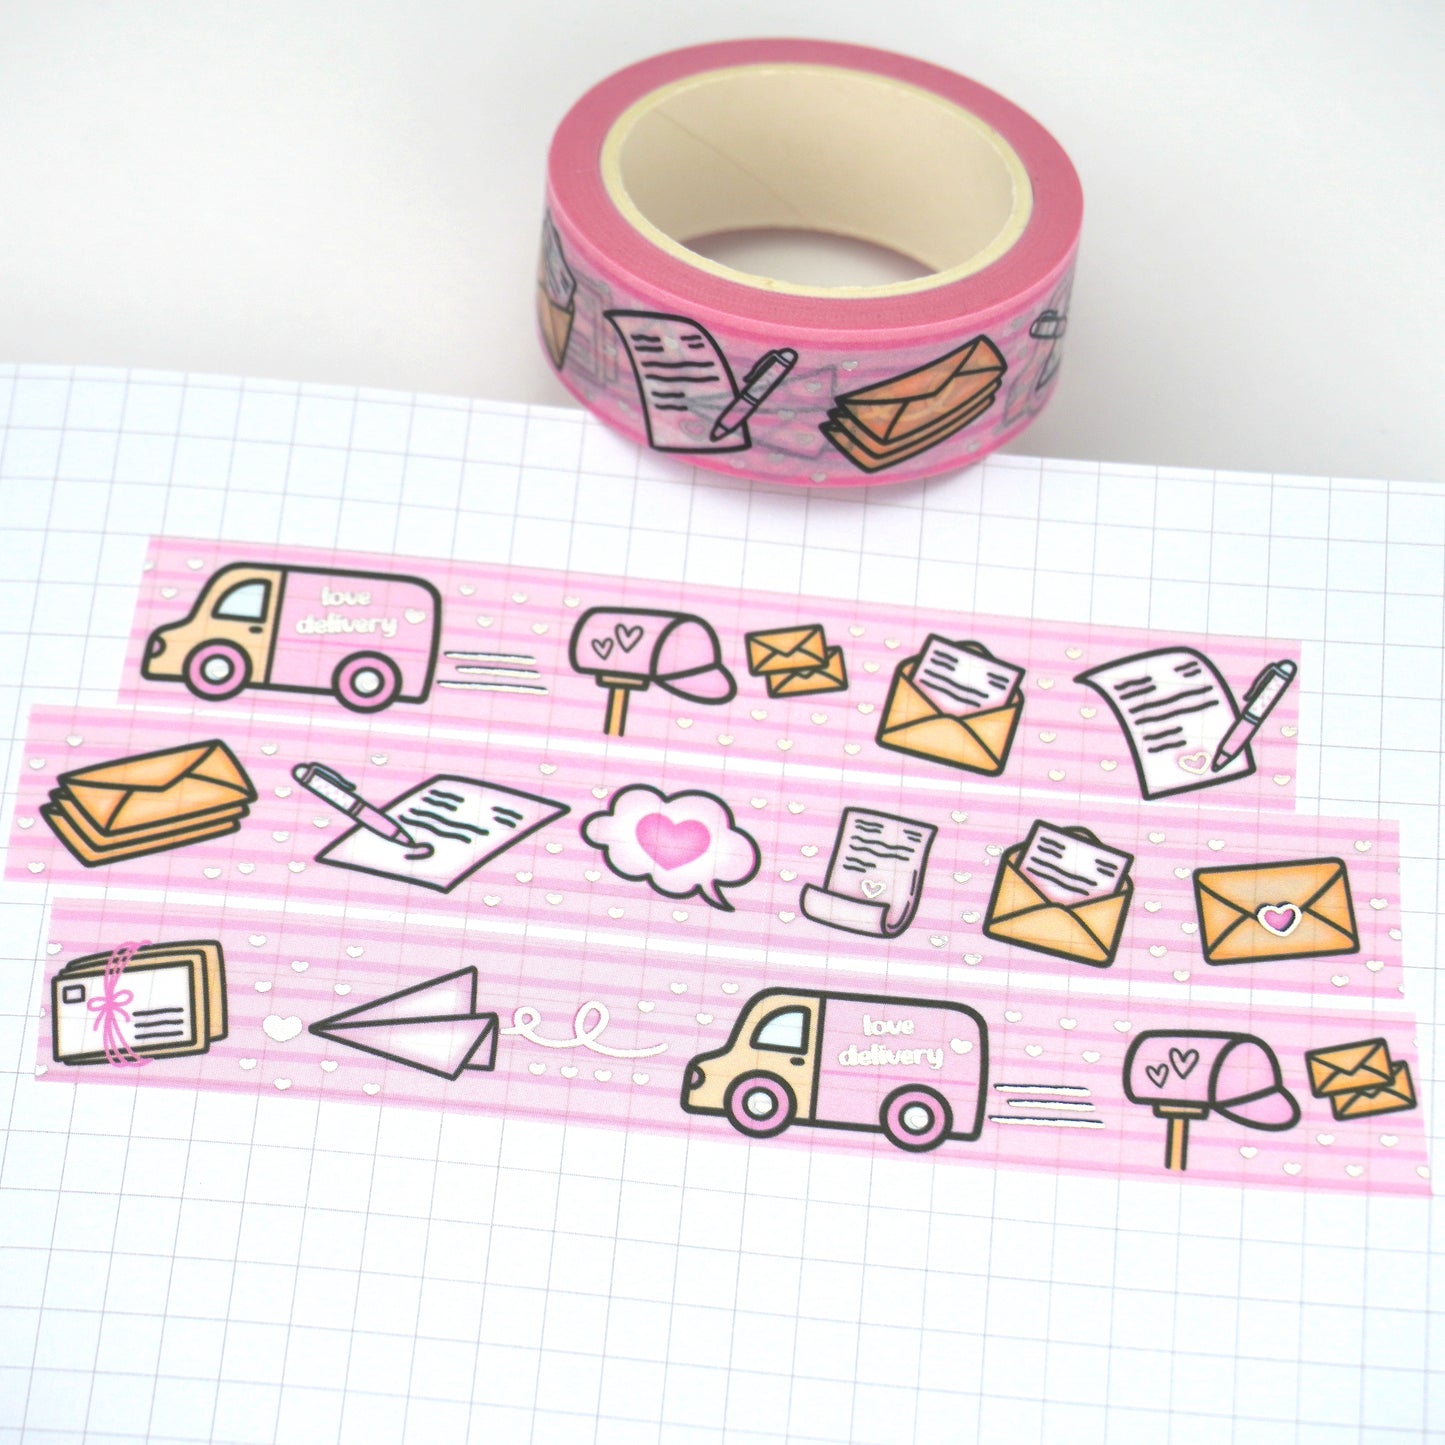 Love delivery | Silver foil | 15mm washi tape